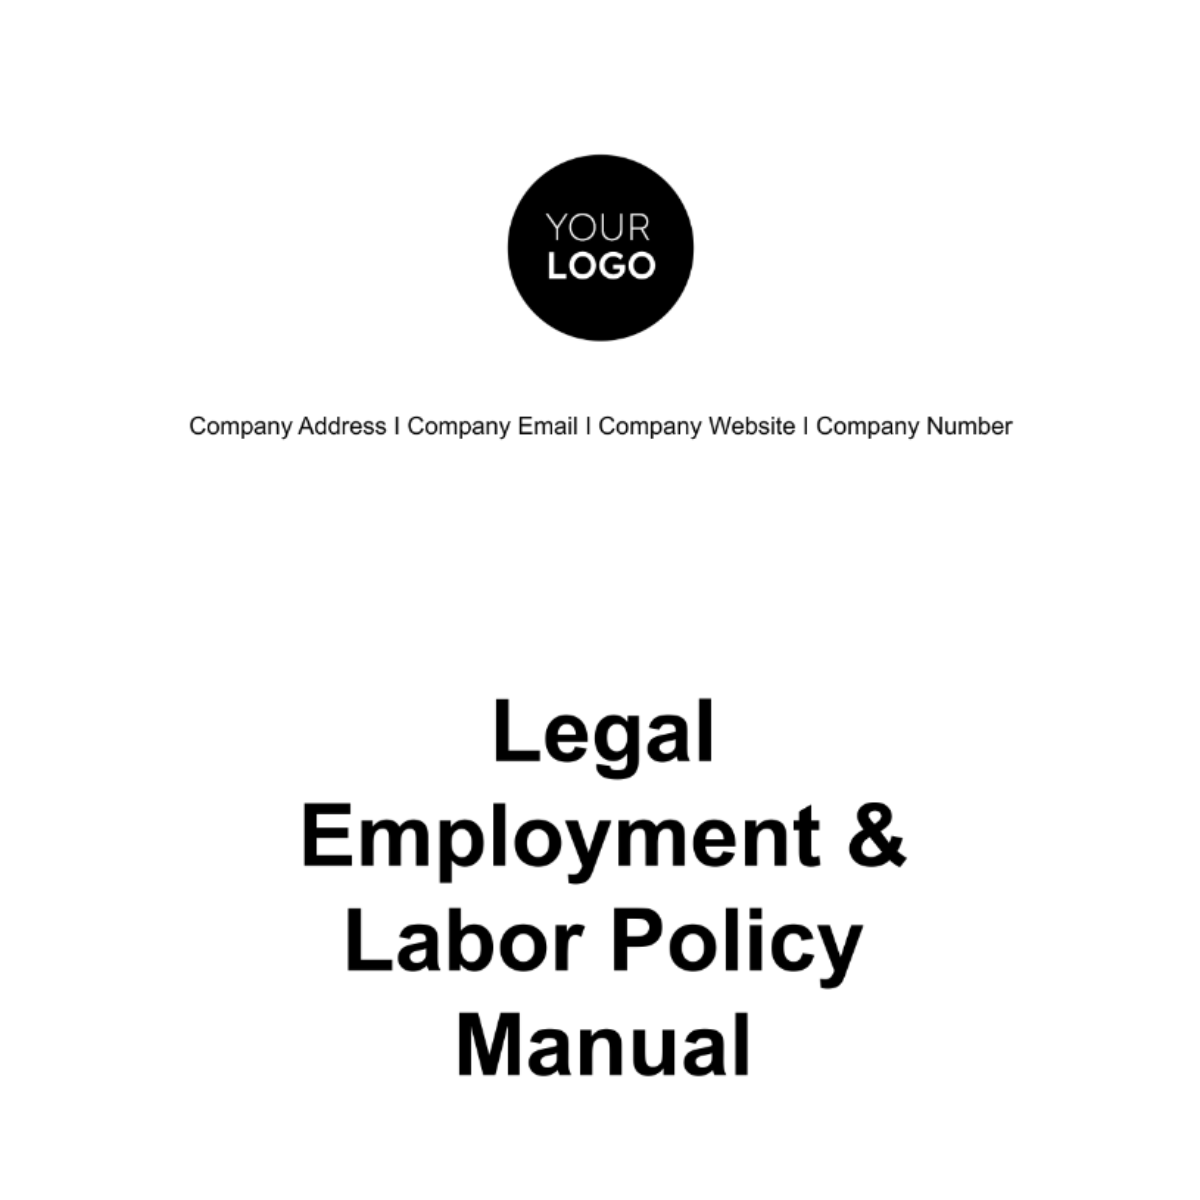 Legal Employment & Labor Policy Manual Template